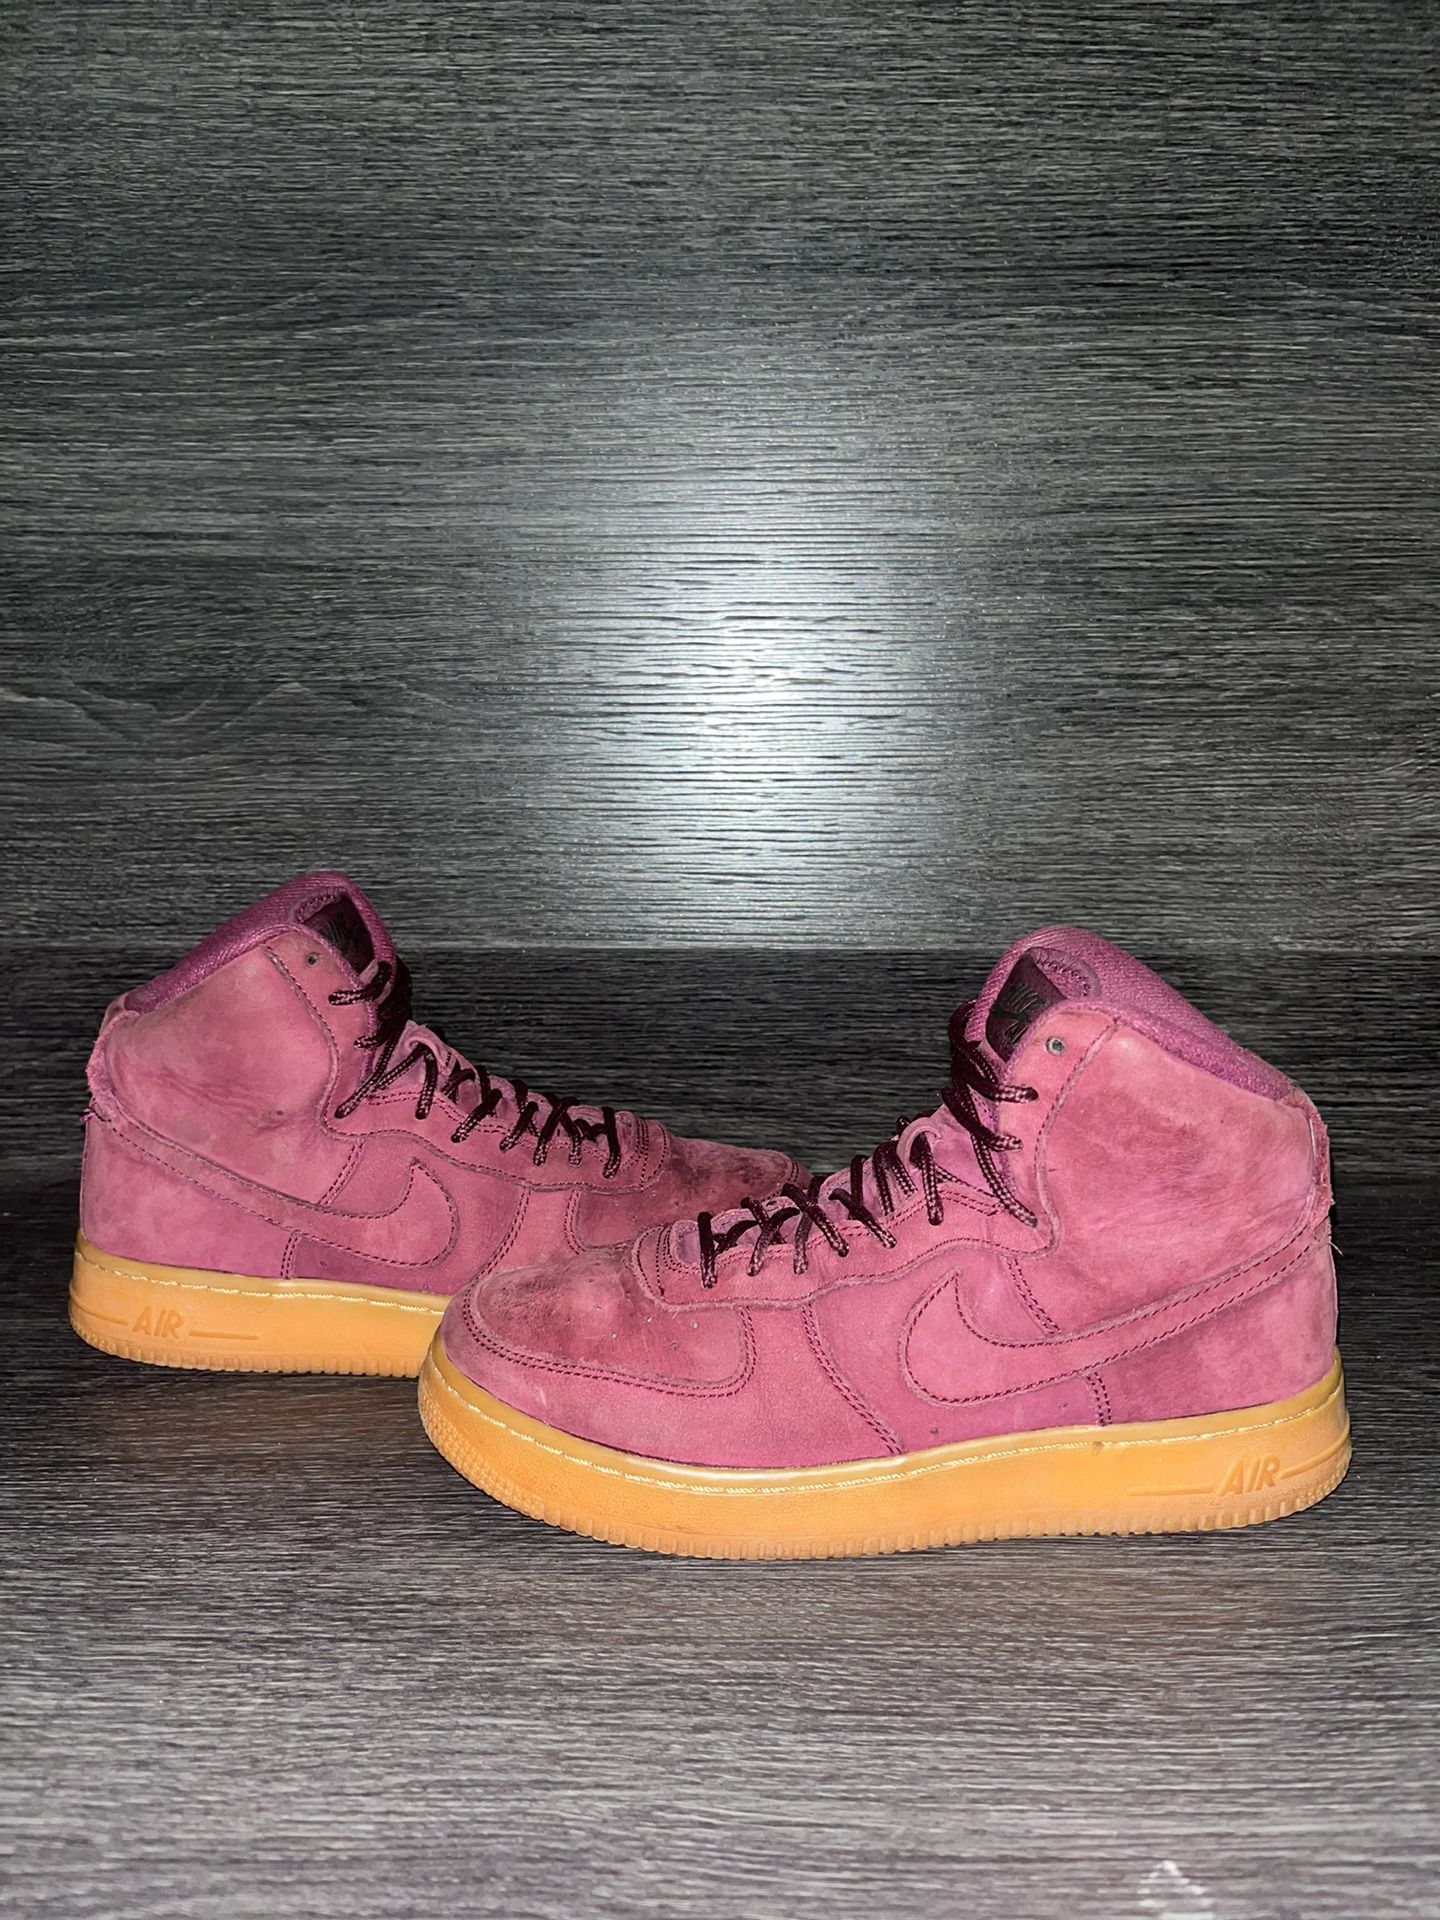 Women’s Air Force 1 - Burgundy - Great Condition 